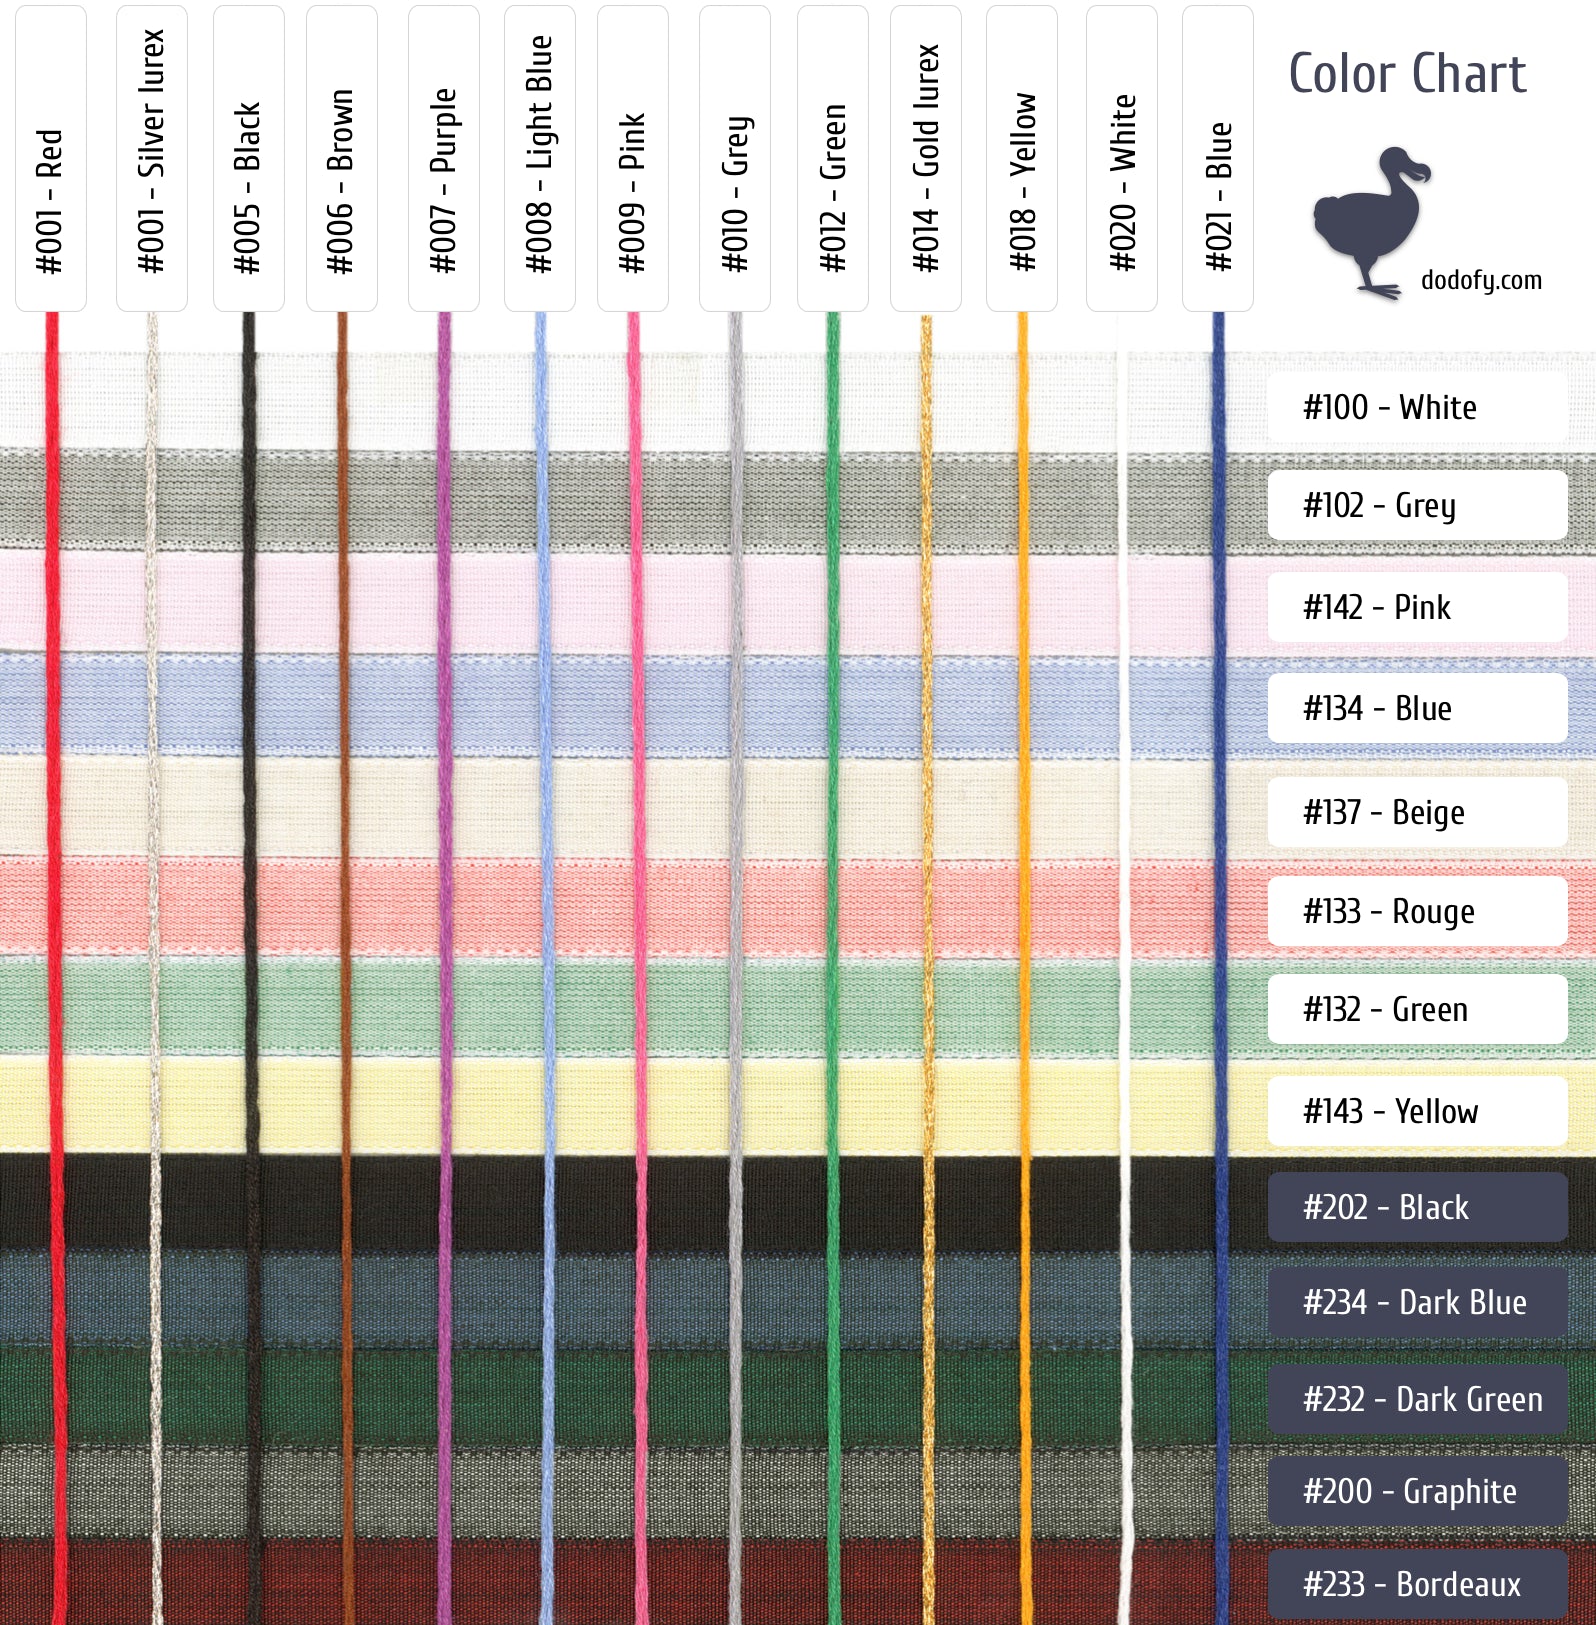 Dodofy Color Chart of 2023